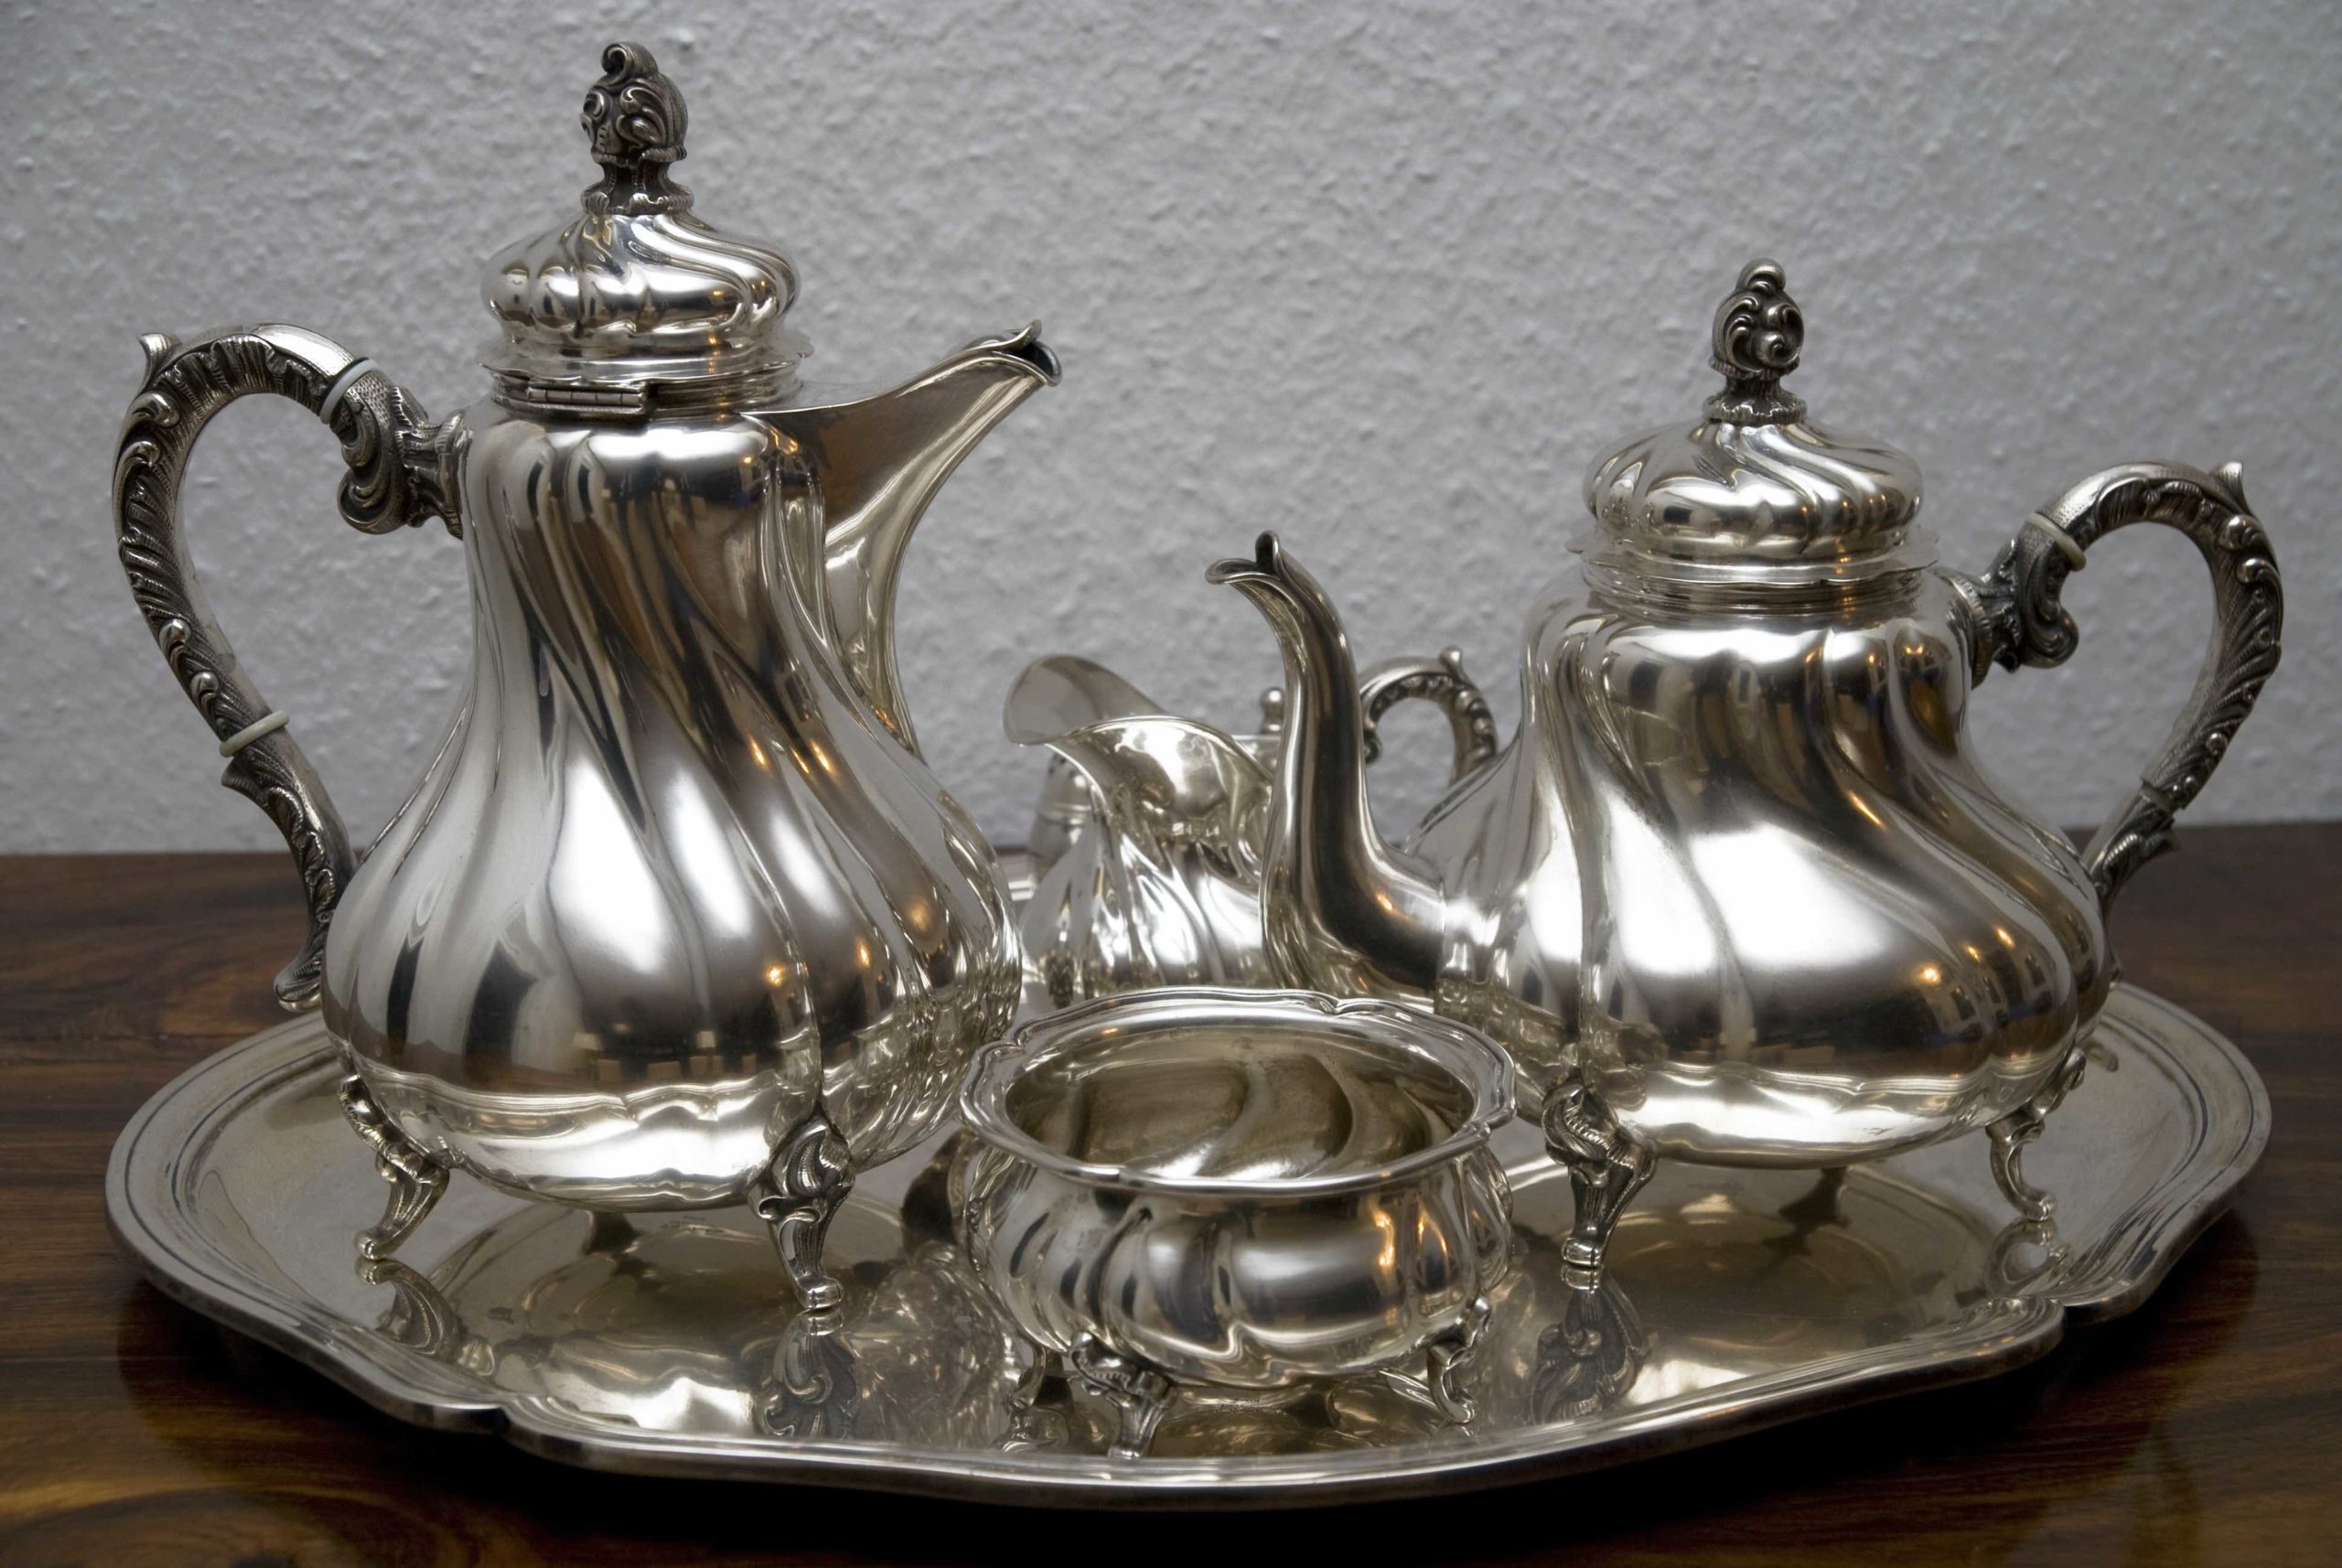 Ready to Sell Your Inherited Silver Items? Here's What to Expect. How to  Safely Sell Your Silver for a Surprising Return